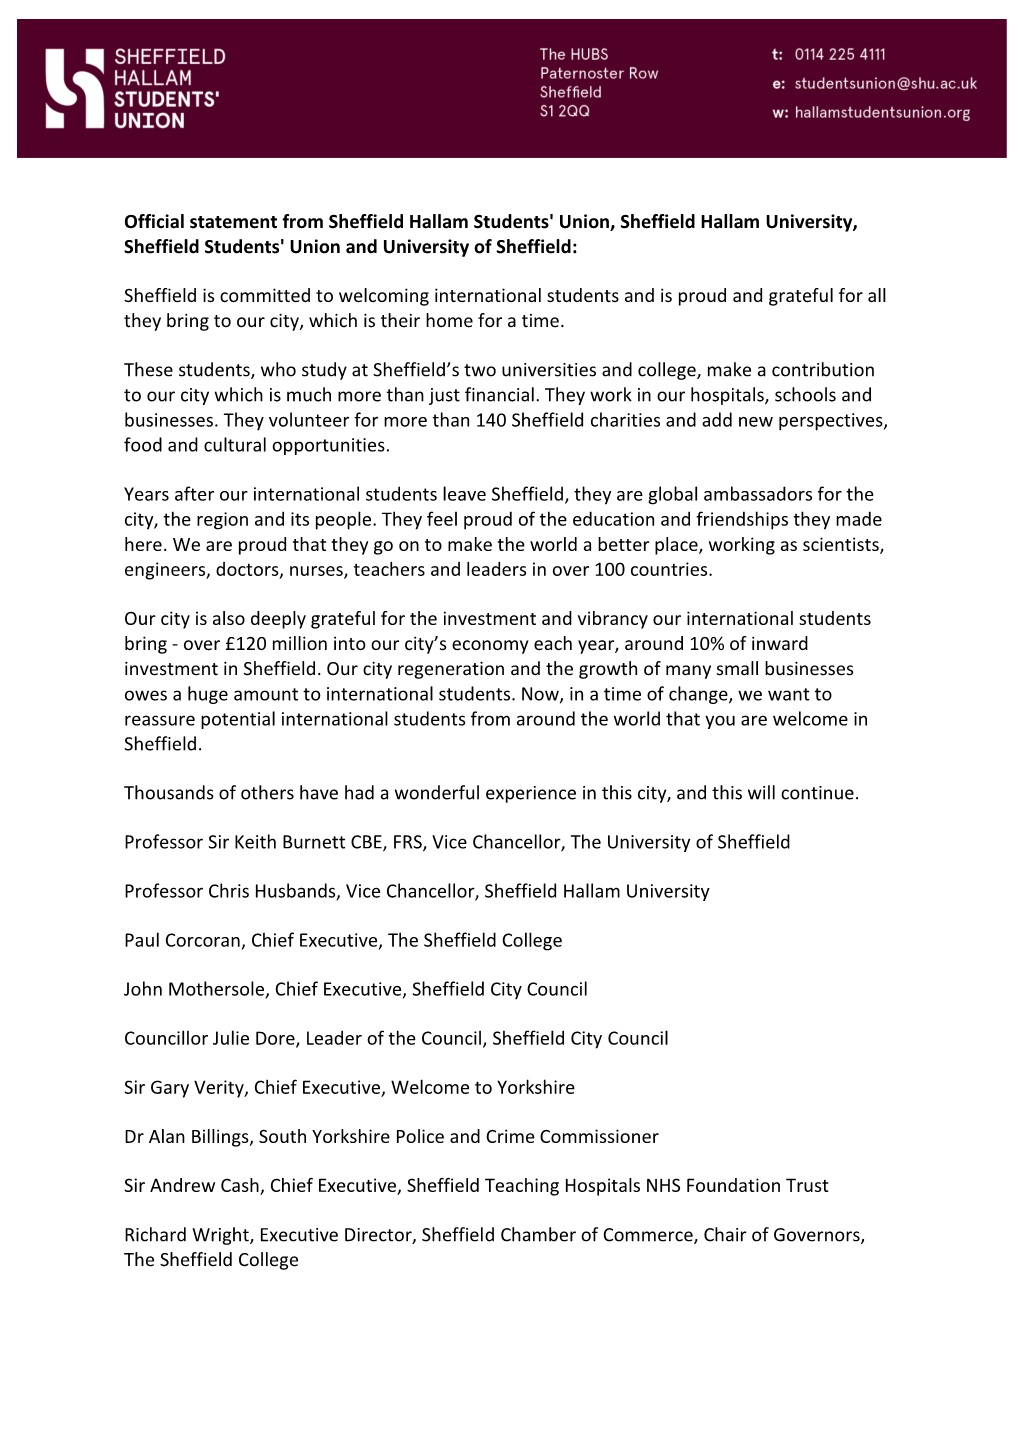 Official Statement from Sheffield Hallam Students' Union, Sheffield Hallam University, Sheffield Students' Union and University of Sheffield